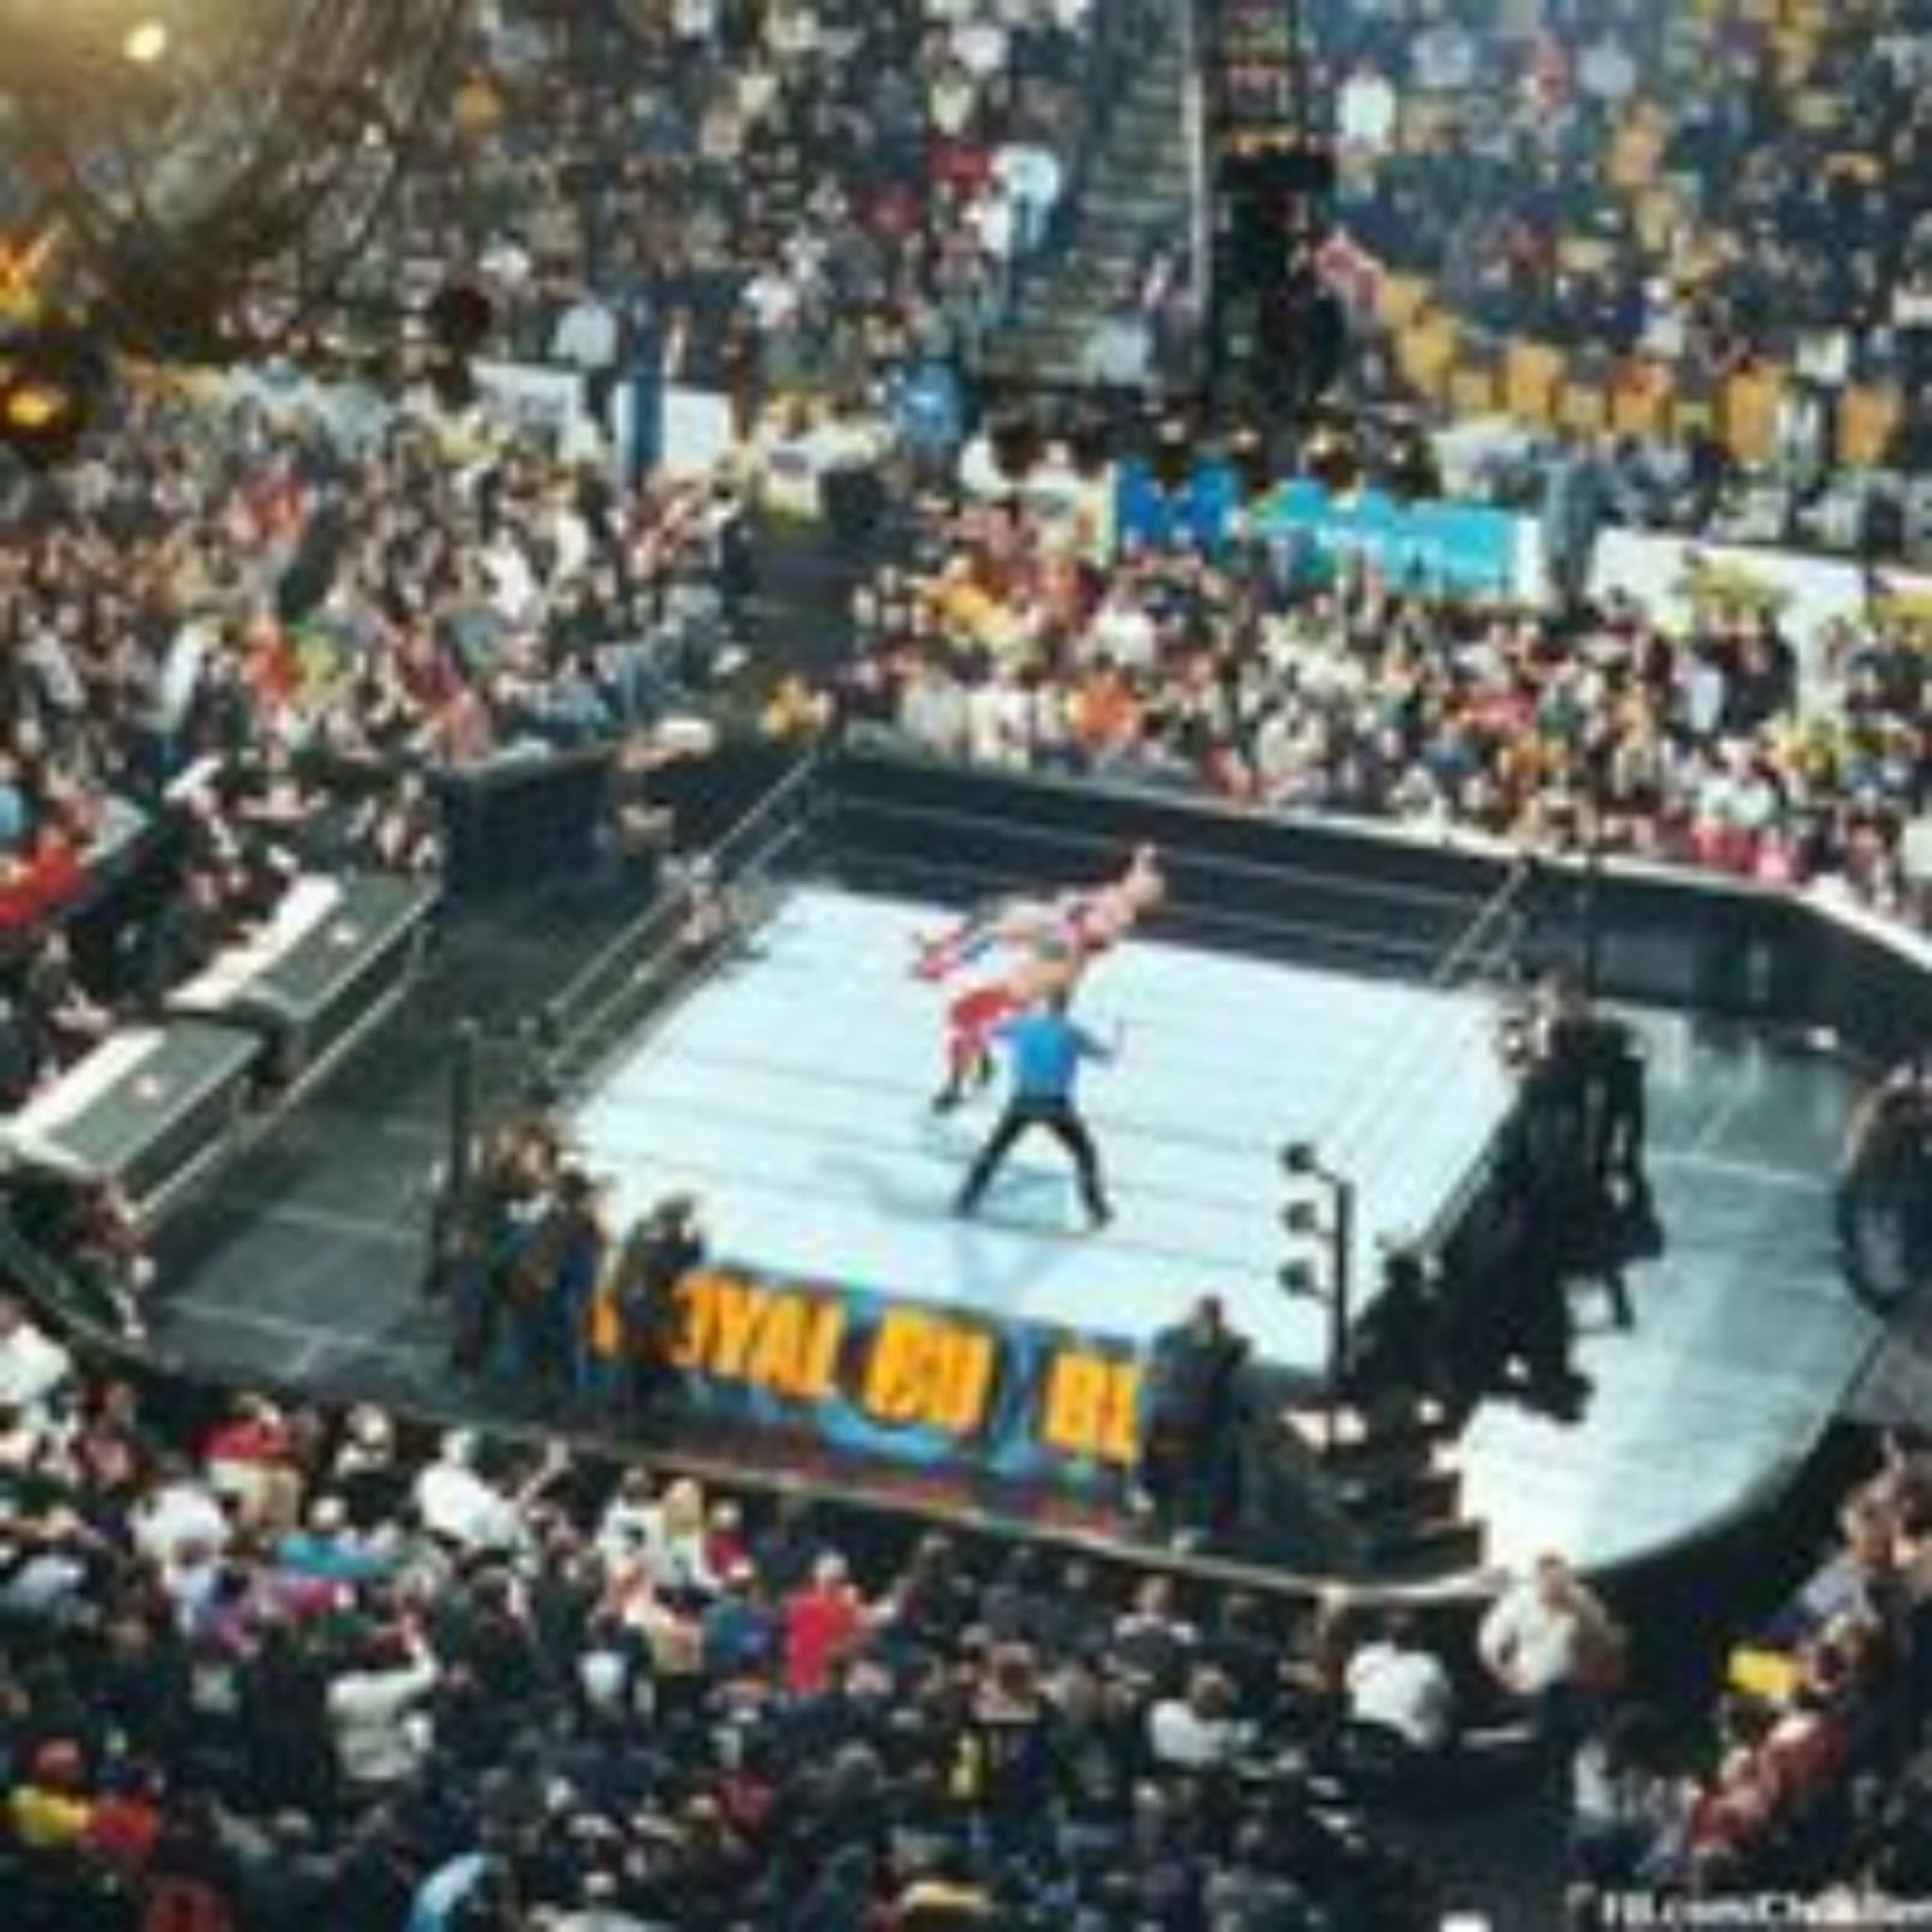 Kurt Angle A Great Aerial Photo Of My Match Vs Chris Benoit At Royal Rumble 03 For The Wwe Championship In Front Of A Sold Out Boston Crowd Where Chris Received